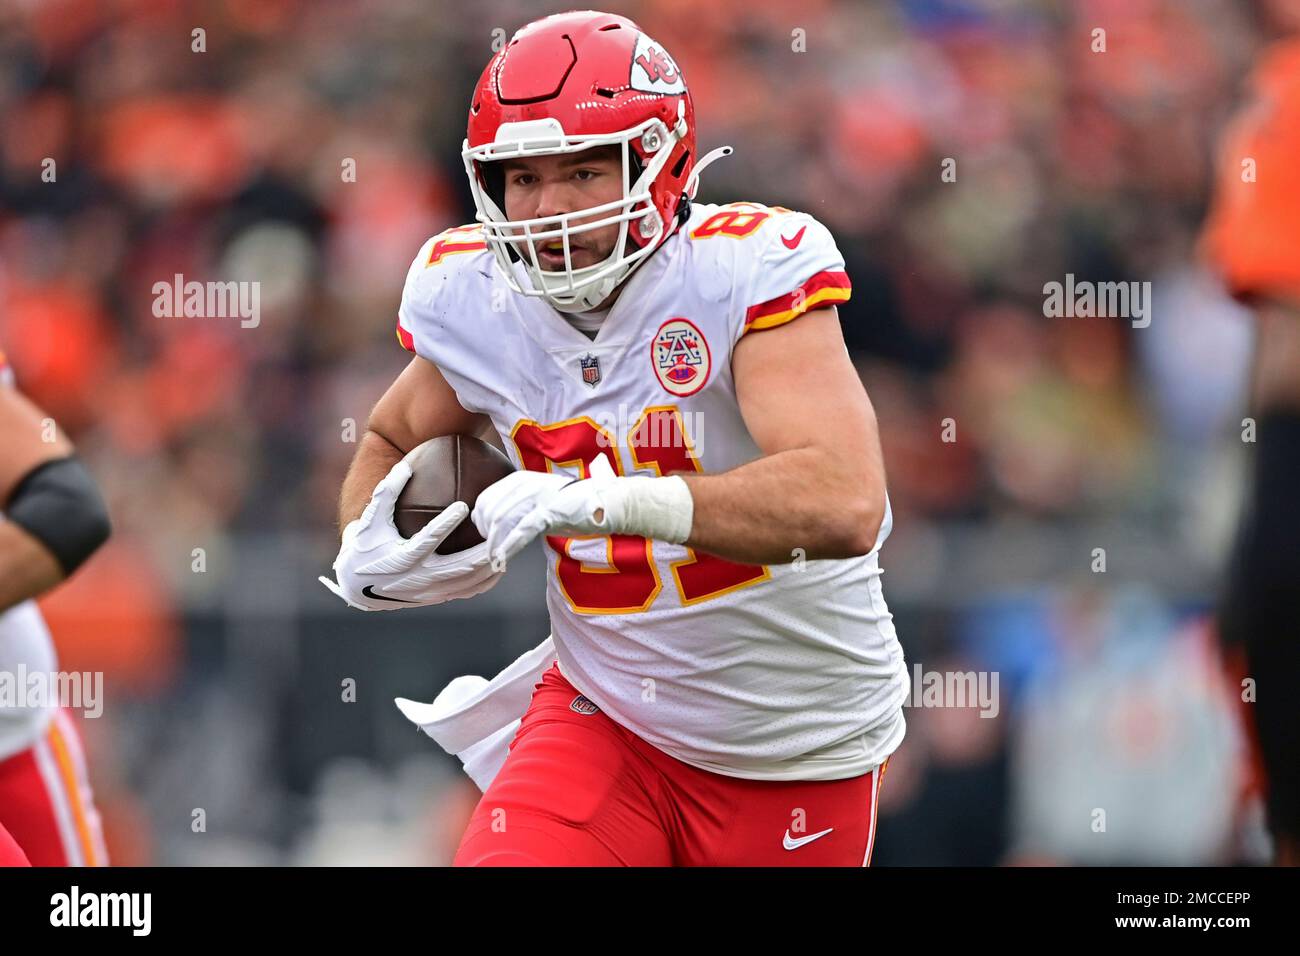 Kansas City Chiefs tight end Blake Bell (81) runs with the